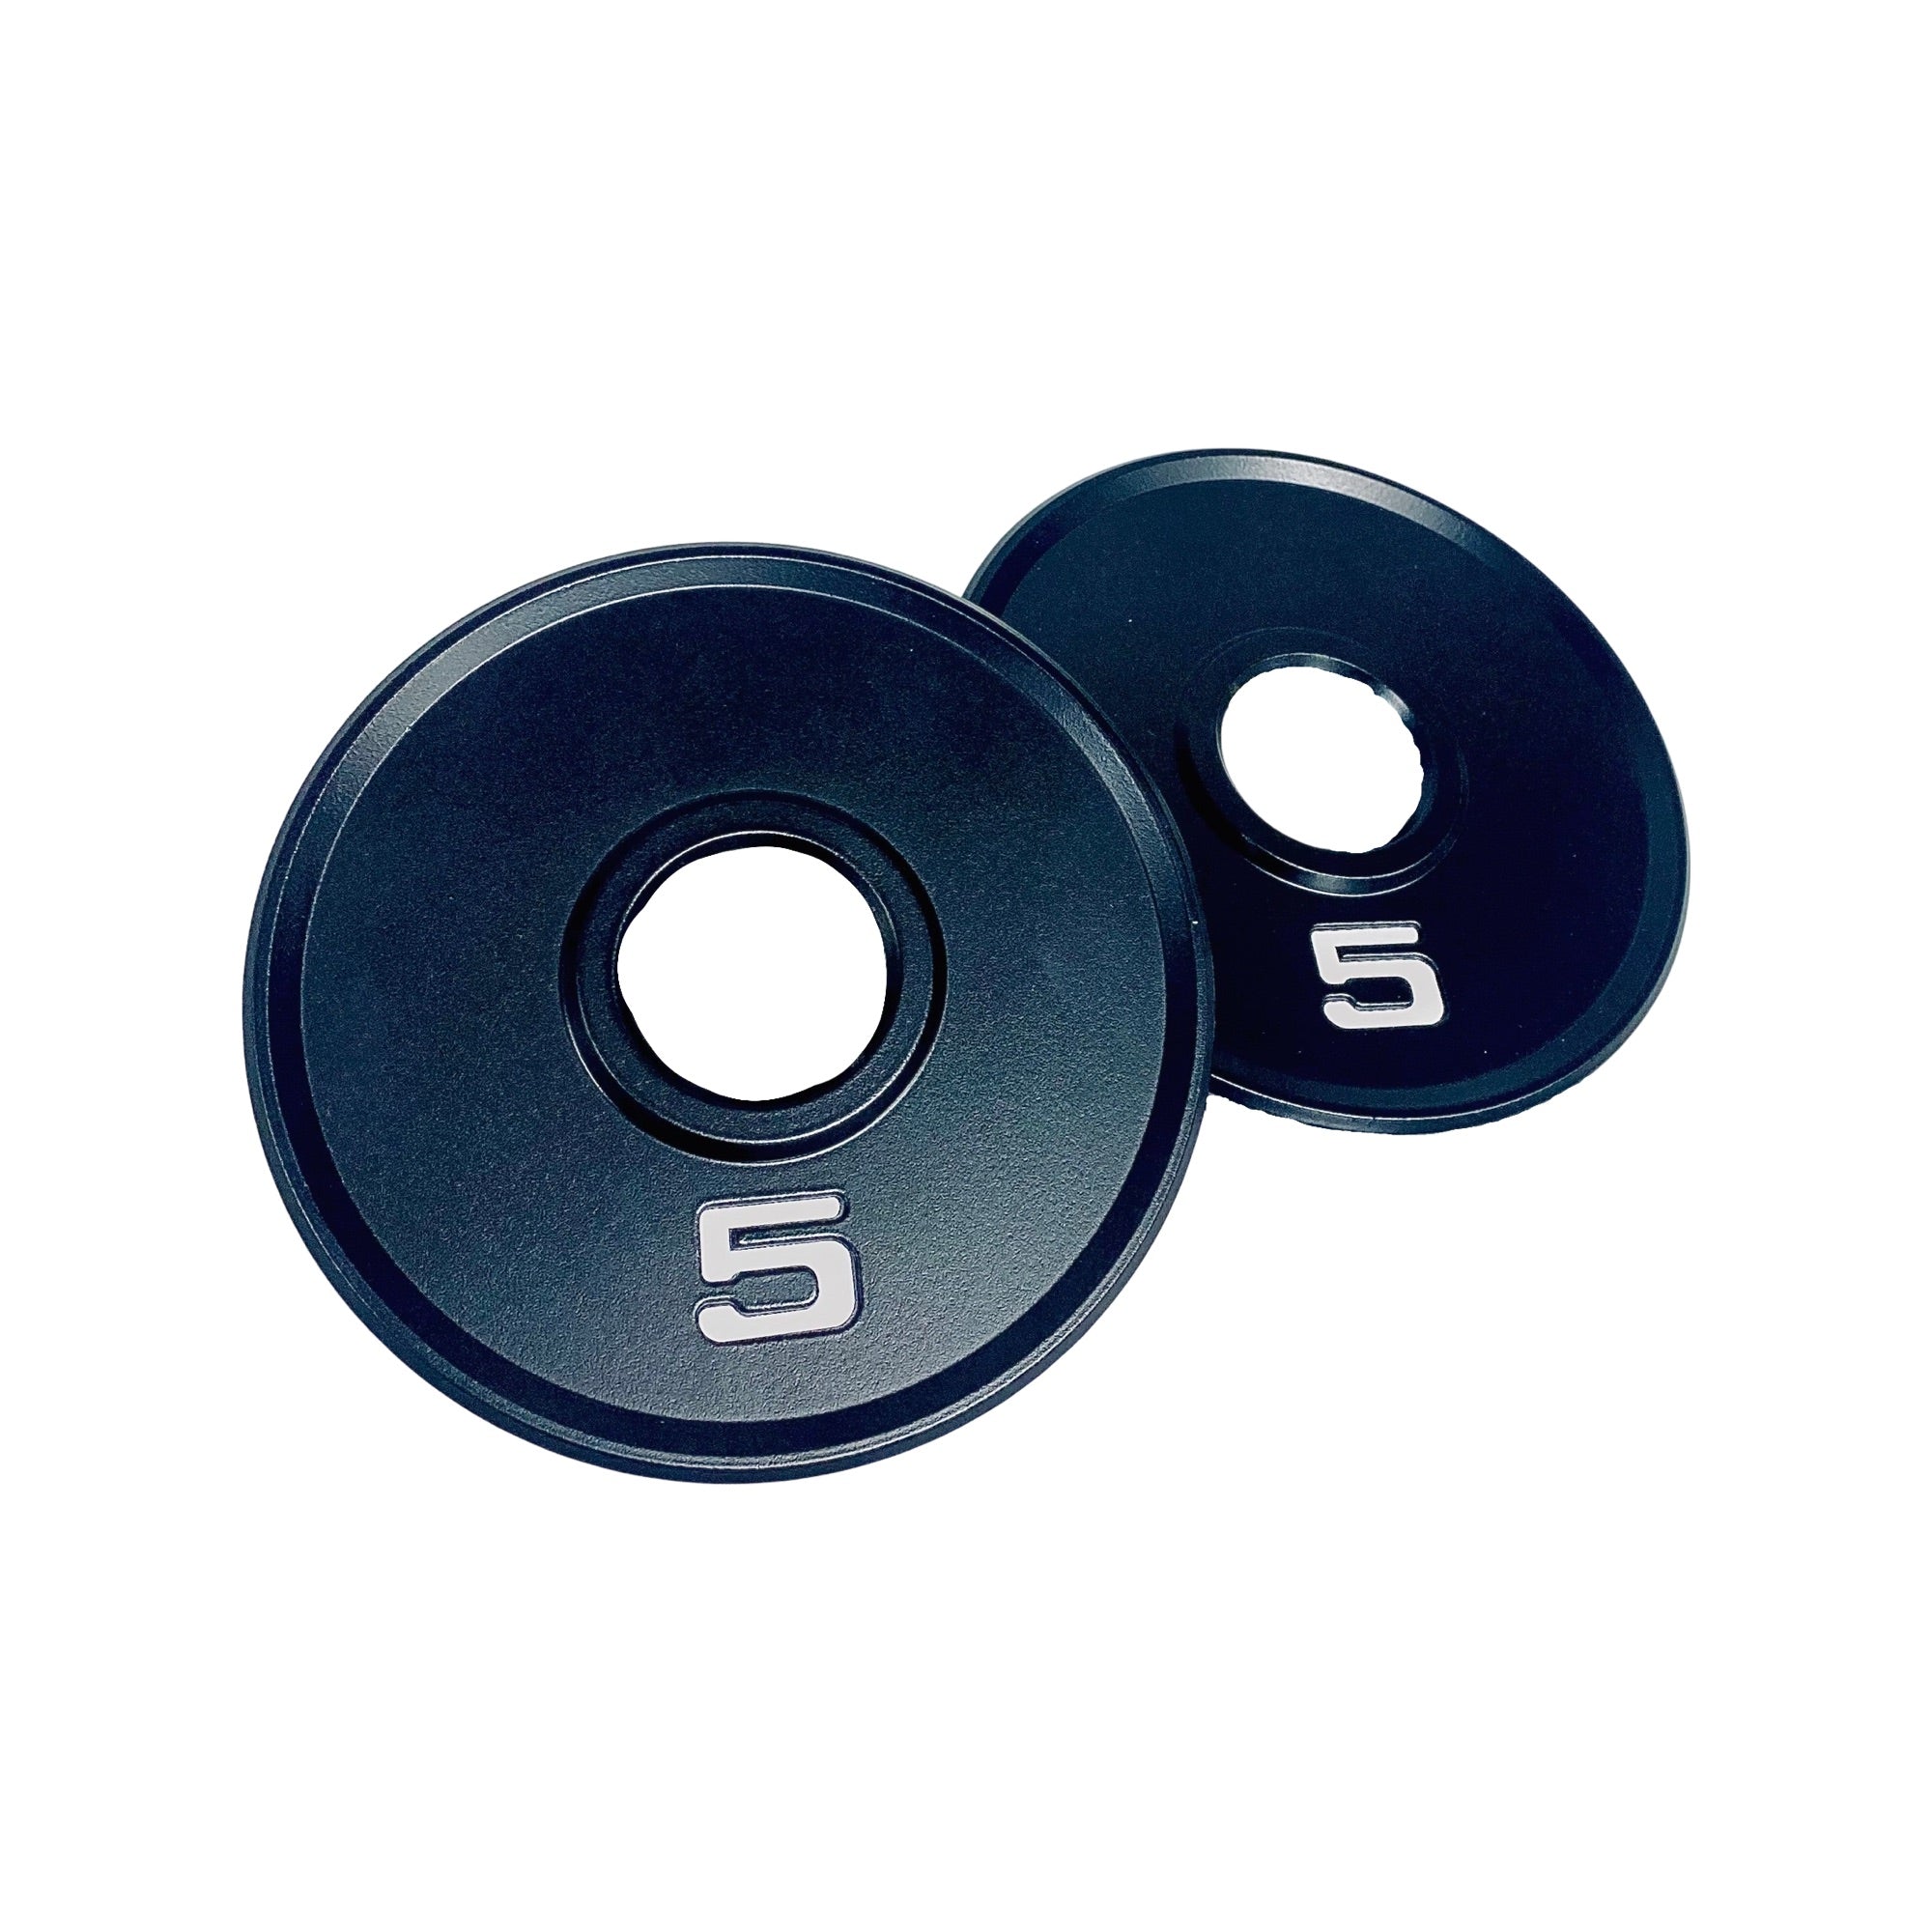 Steel Plate Weights (Pairs)